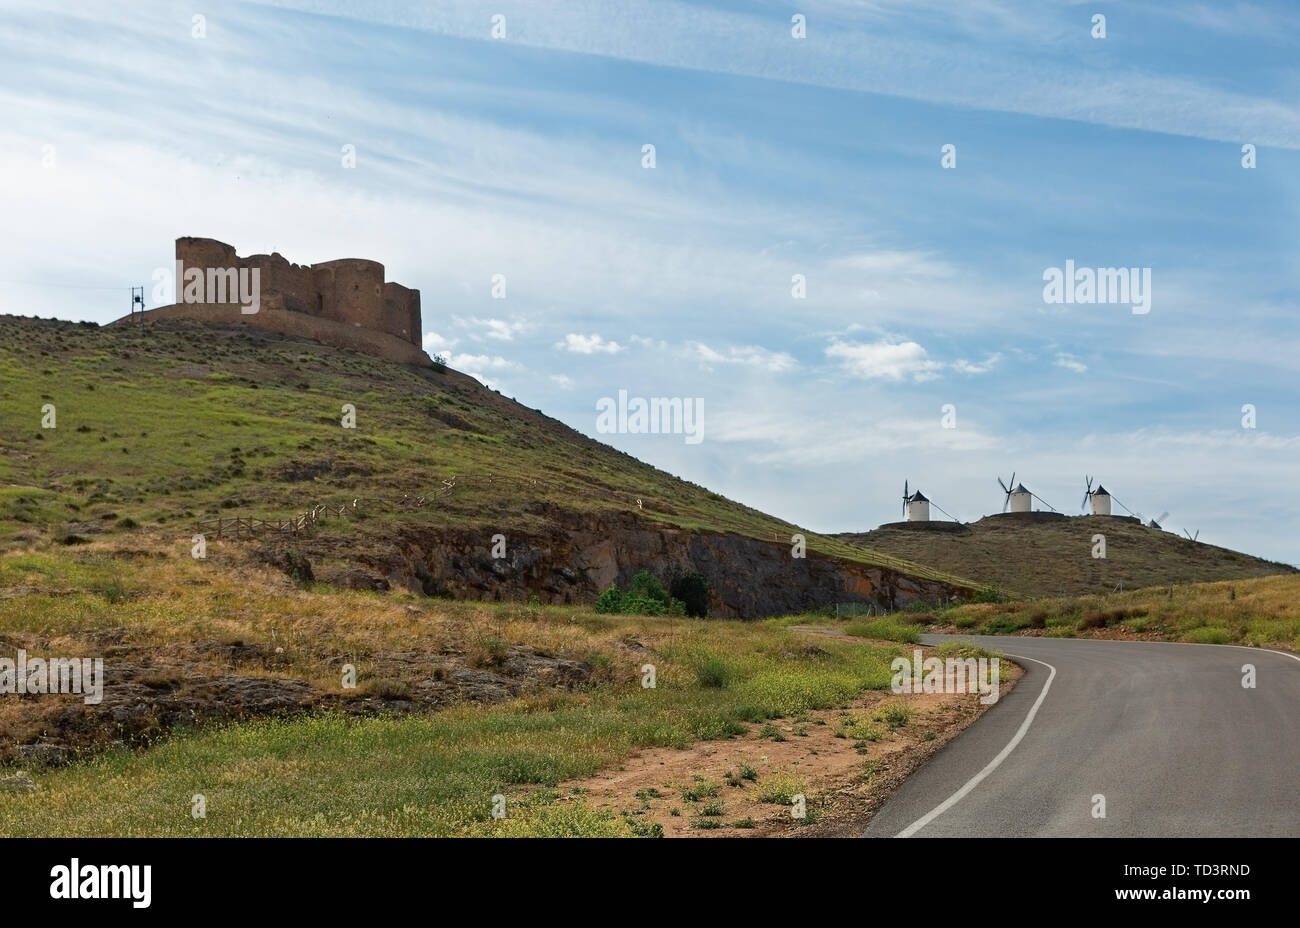 ruins of an old fortress in Consuegra Spain Stock Photo